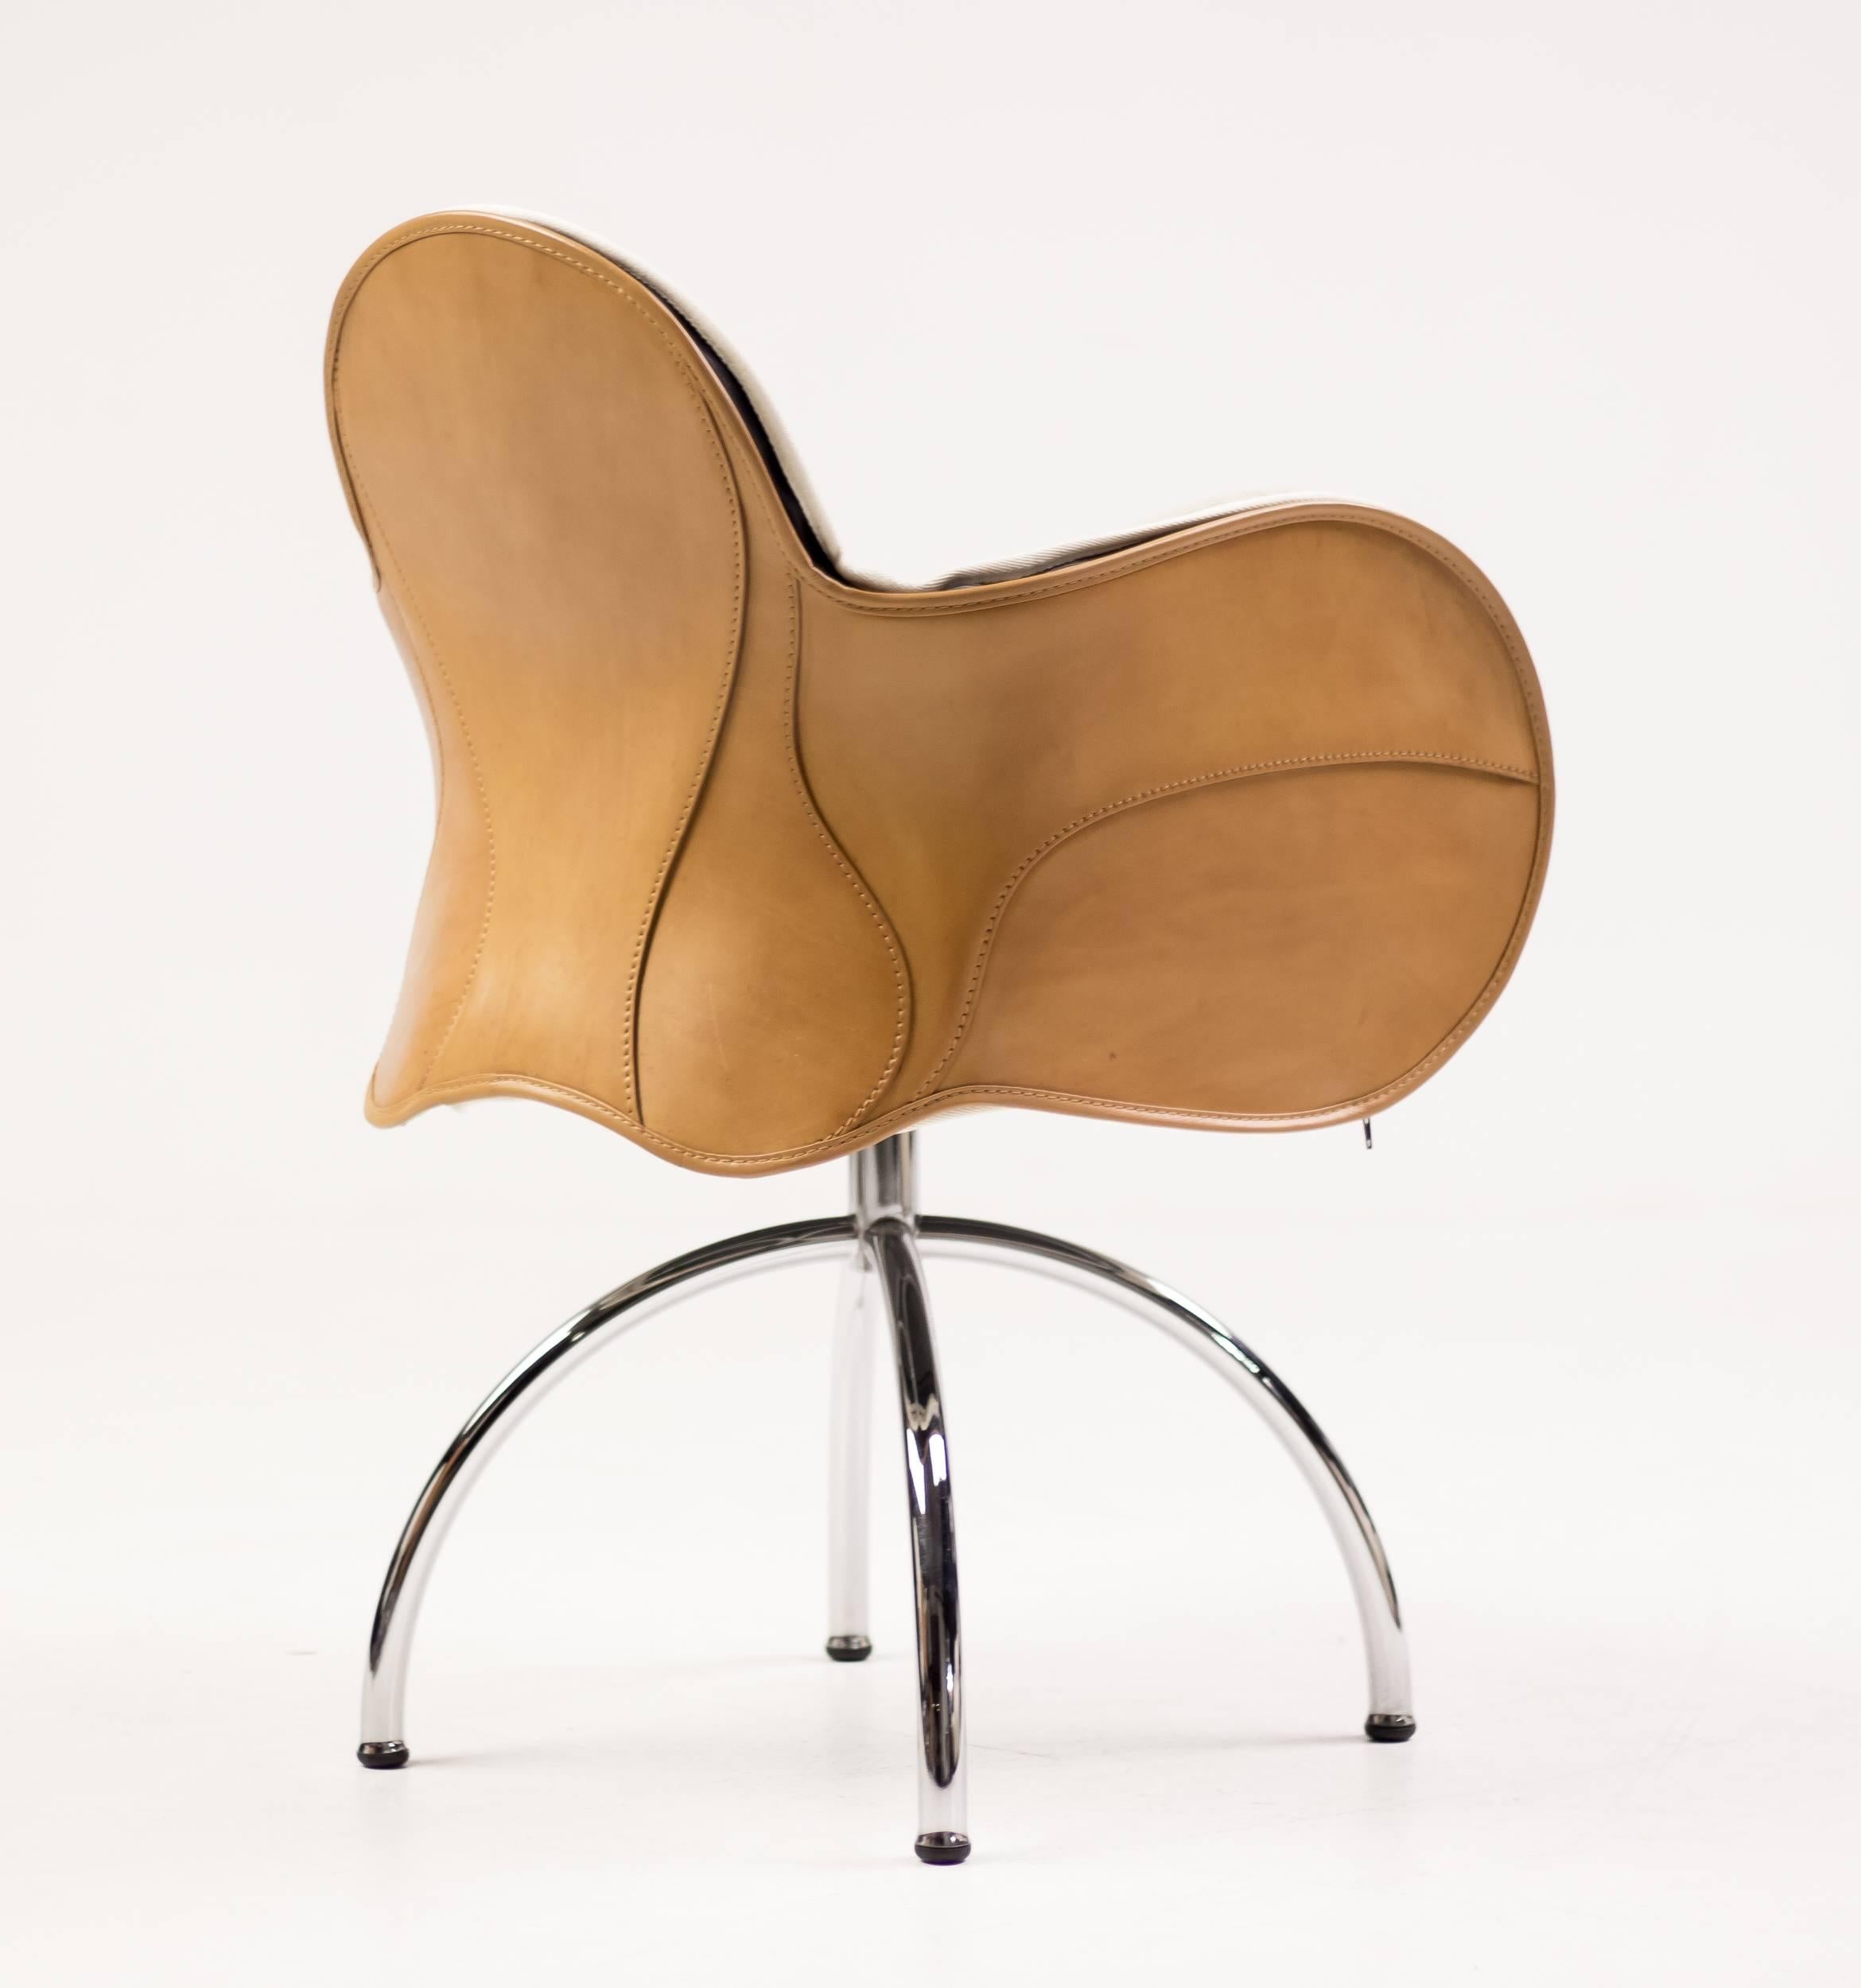 Modern De Padova Incisa Chair and Serbelloni Desk Chair in Saddle Leather